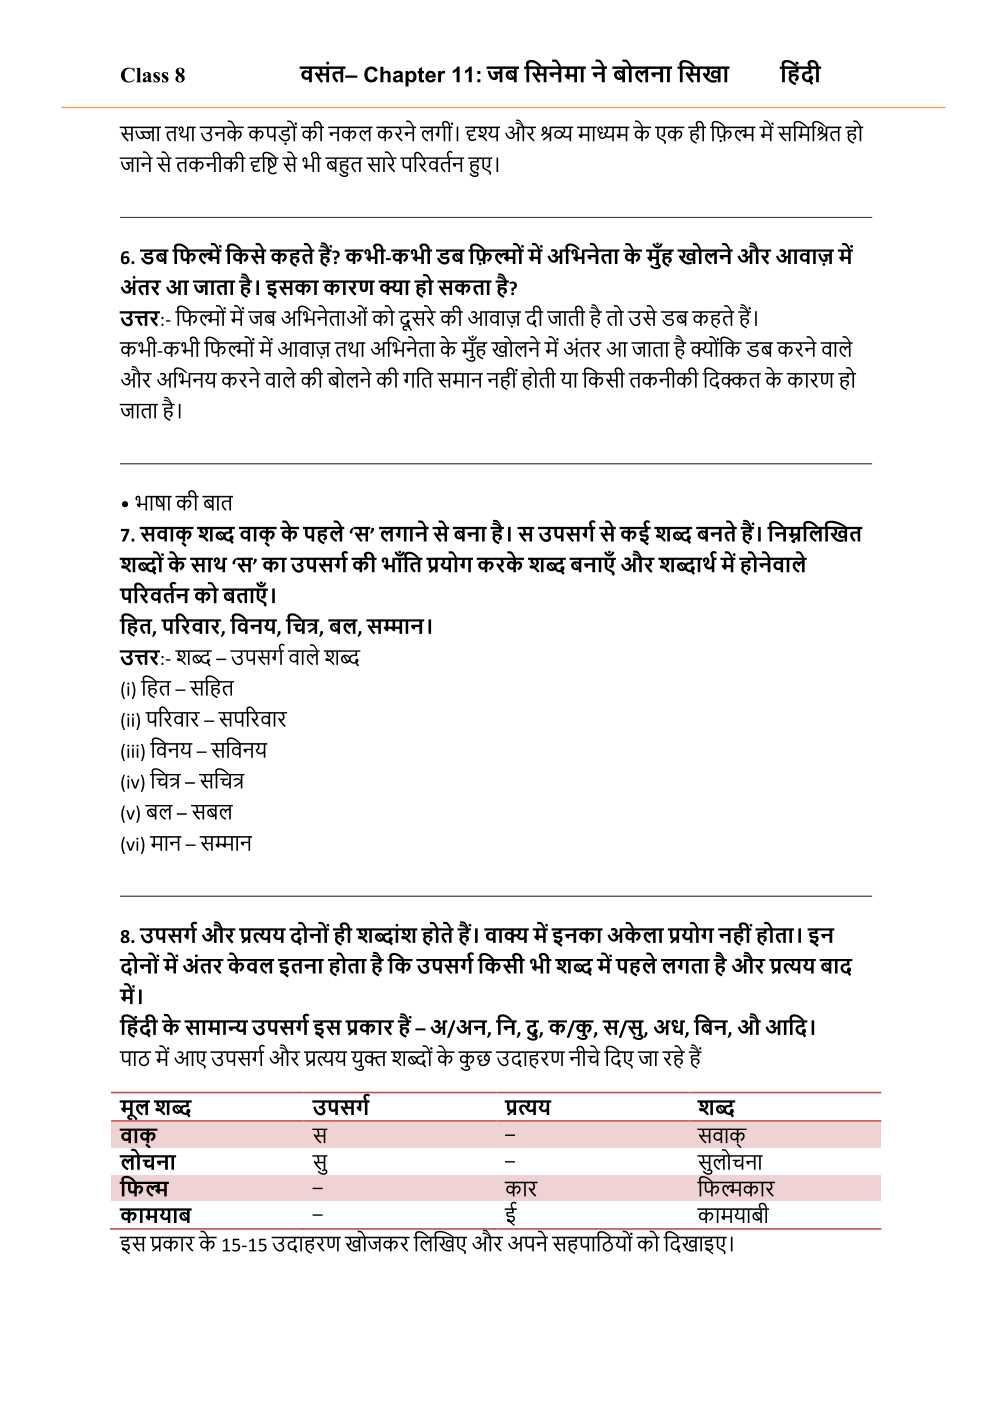 NCERT Solutions For Class 8 Hindi Vasant Chapter 11